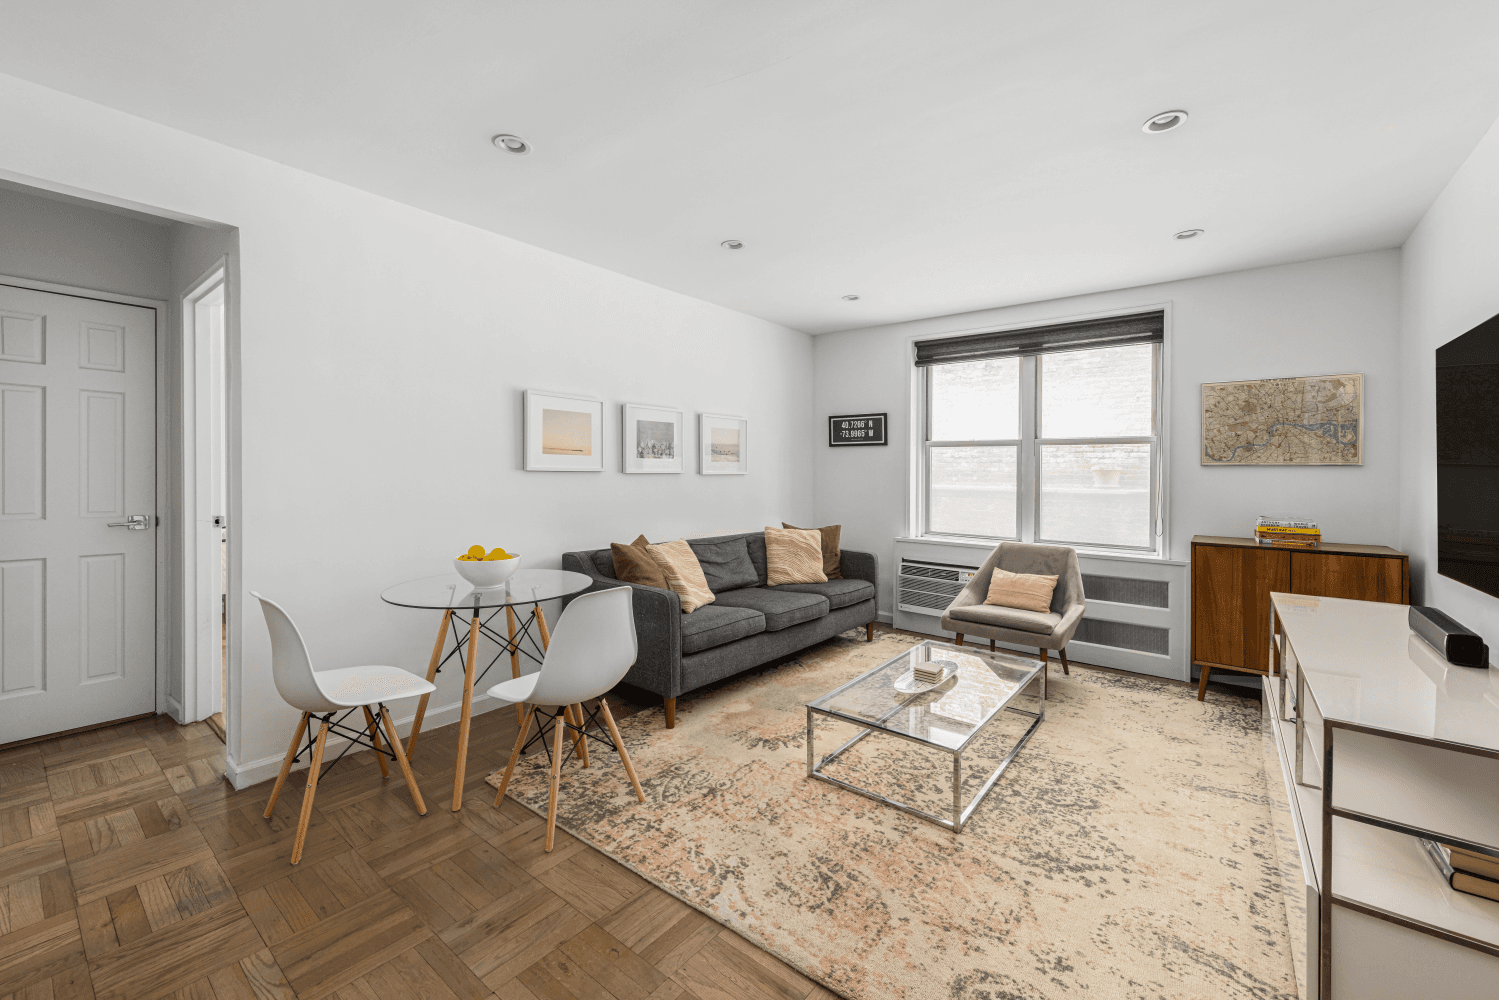 Situated on the on the second floor, residence 1C has been exquisitely reimagined and transformed in to a modern a quiet escape from city living.